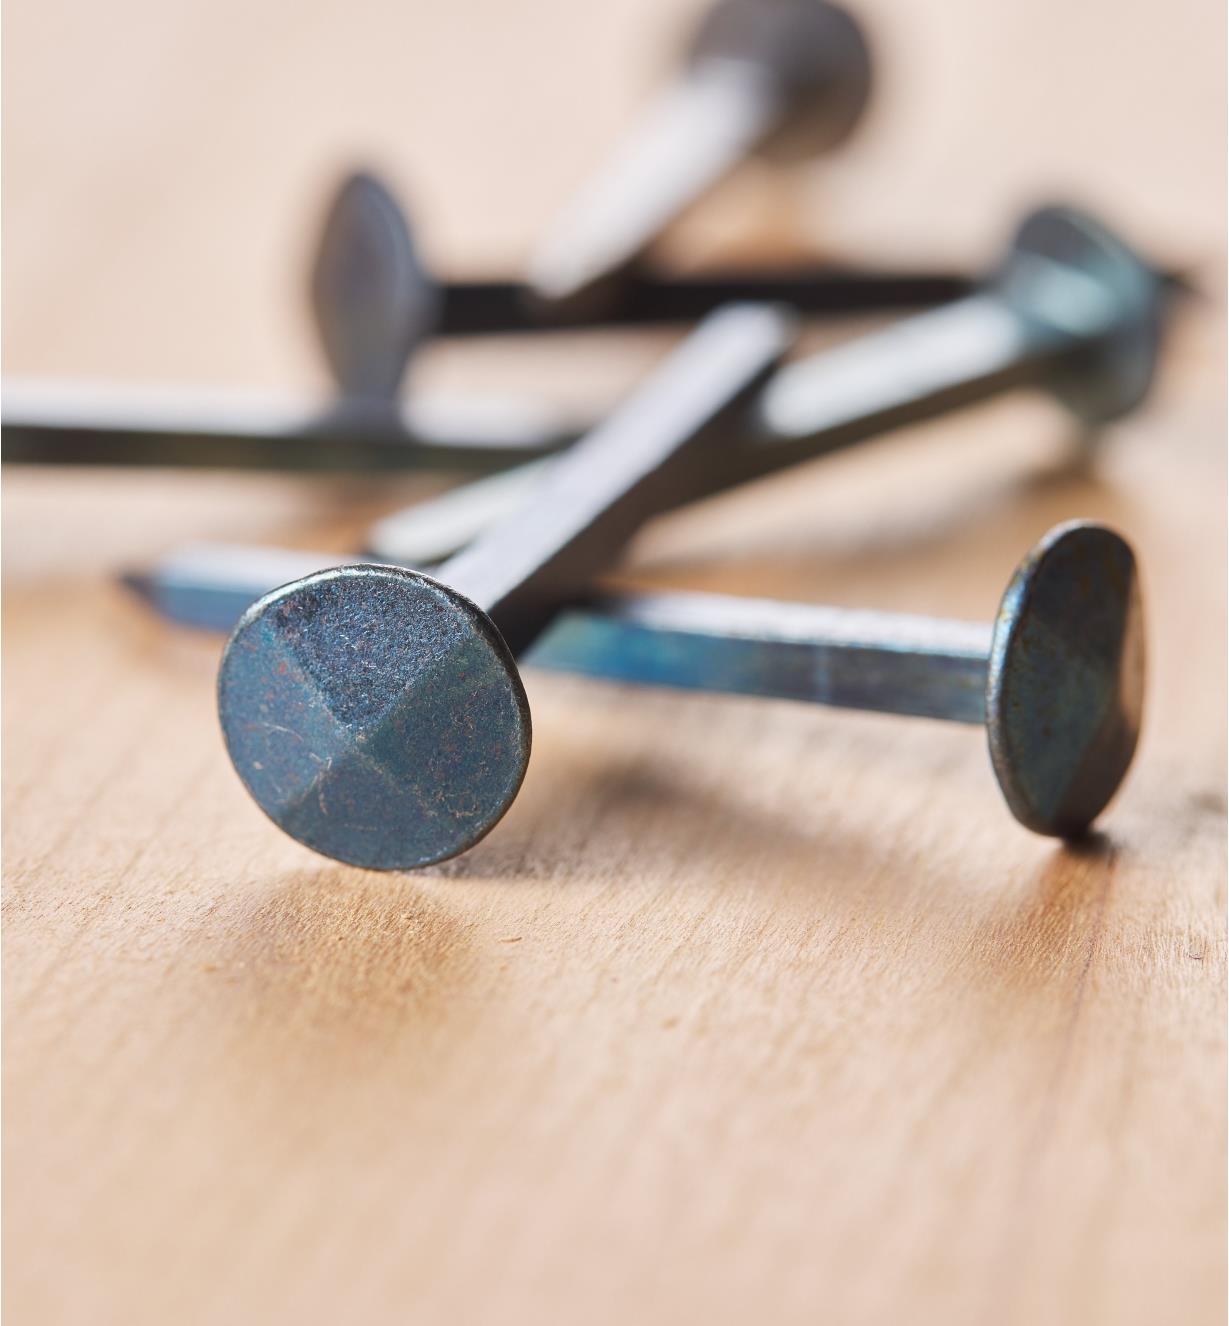 Several Blued Steel Forged Nails from Clouterie Rivierre lying on a board.